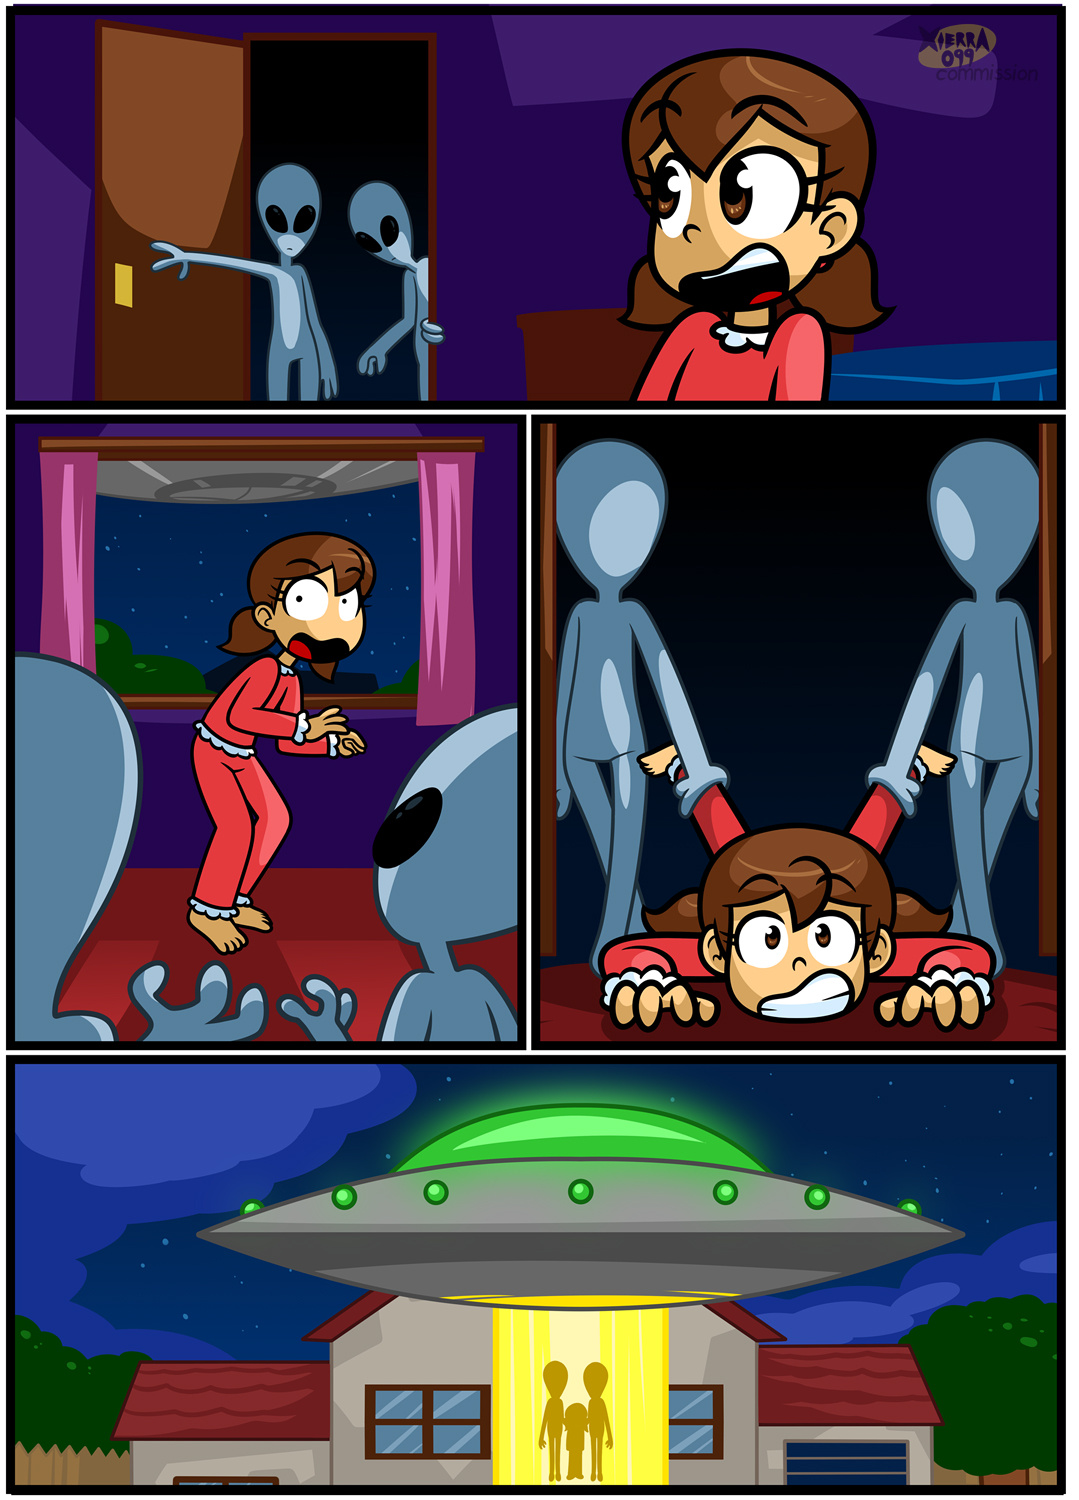 Alien Experience porn comics Aliens, Anal Sex, Kidnapping, Lolicon, Rape, Sex Toys